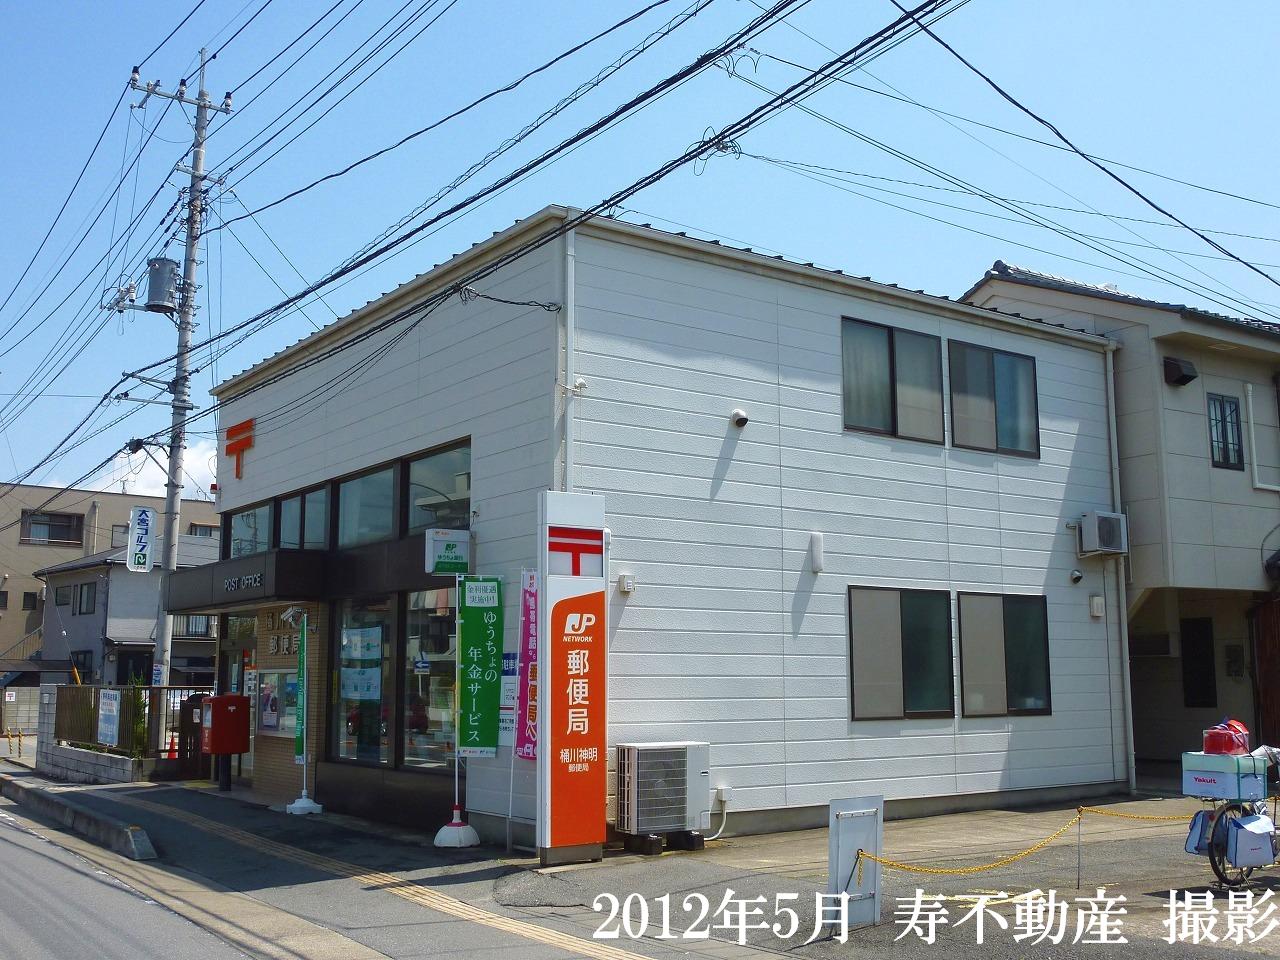 post office. Okegawa Shinmei 625m to the post office (post office)